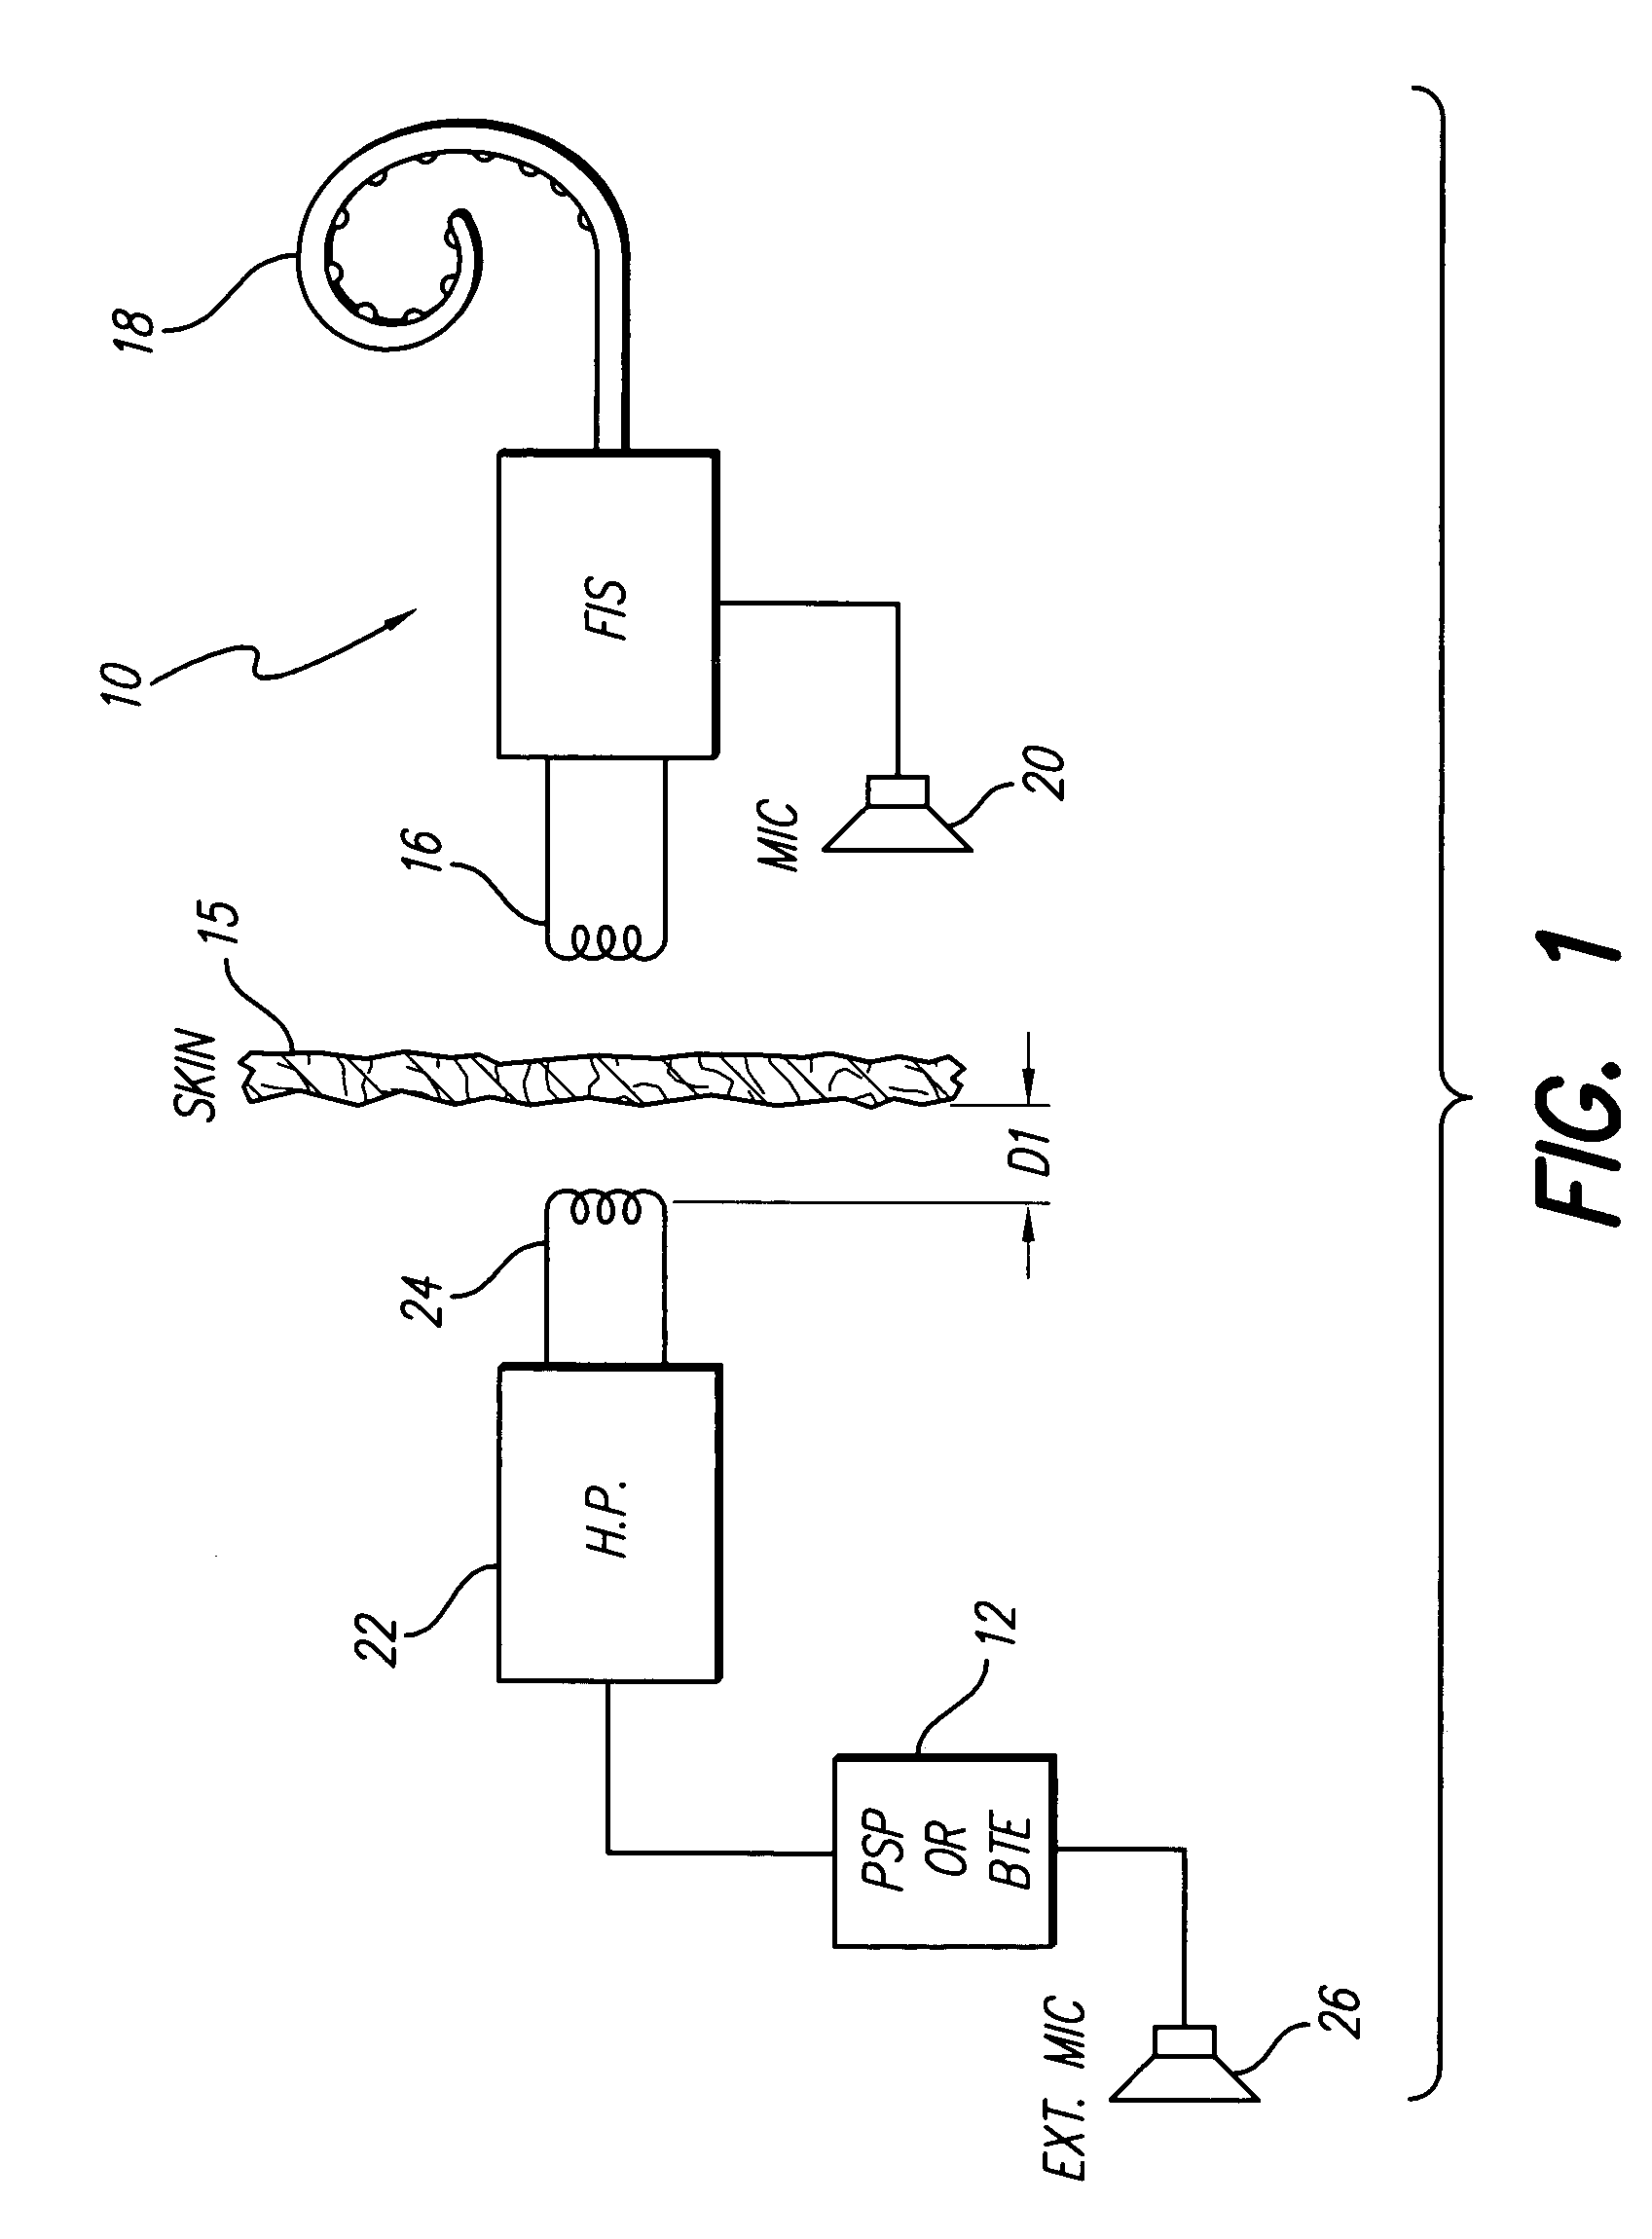 Remote control unit for use with an implantable neural stimulator system